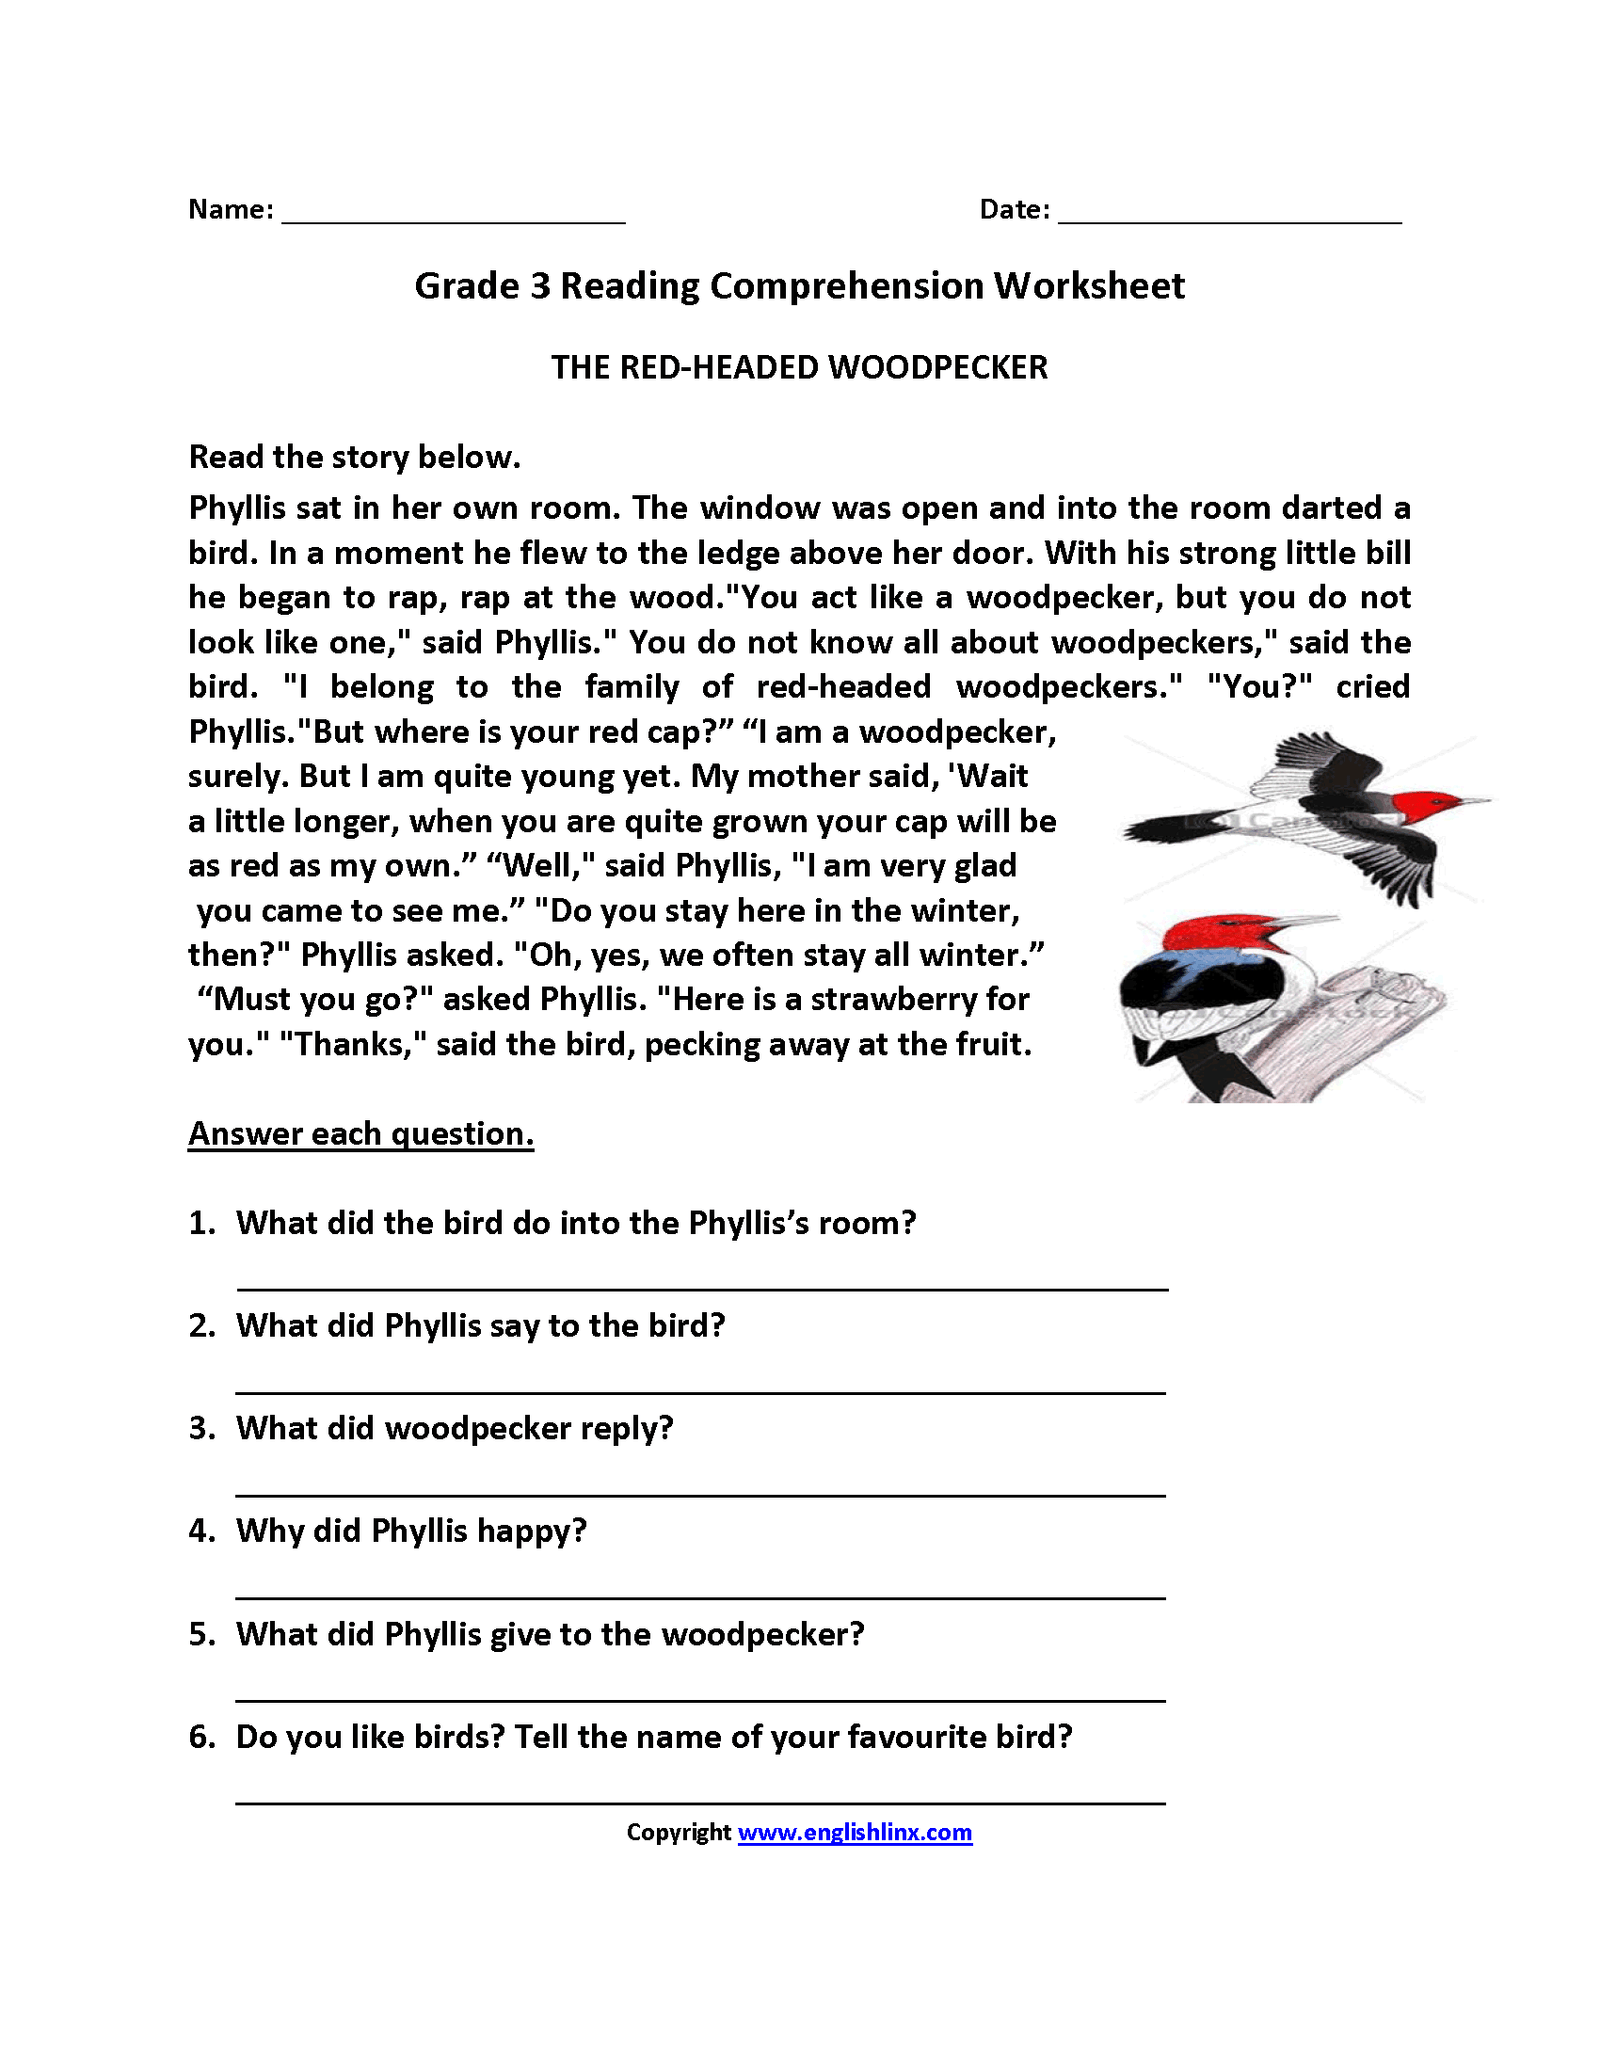 The Amazing Woodpecker Reading Comprehension Worksheets WorksheetsCity